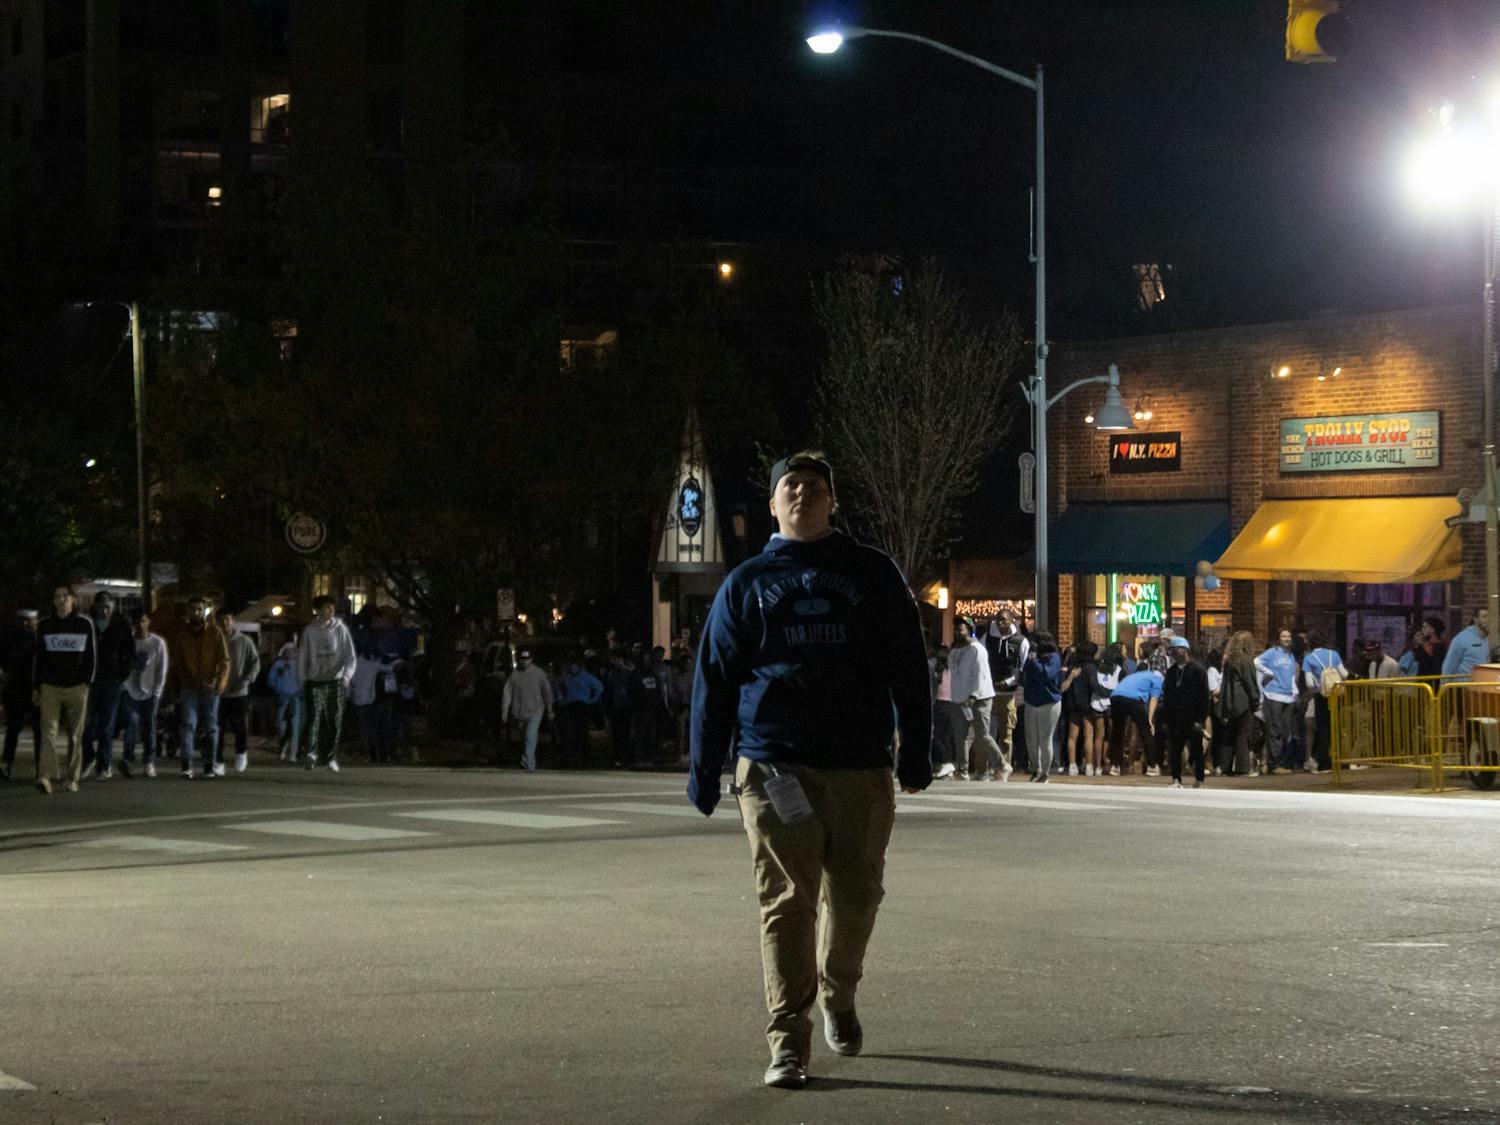 Once hopeful North Carolina men's basketball fans did not rush Franklin St. following the NCAA Championship Game on Monday, April 4, 2022. UNC lost to Kansas 69-72.